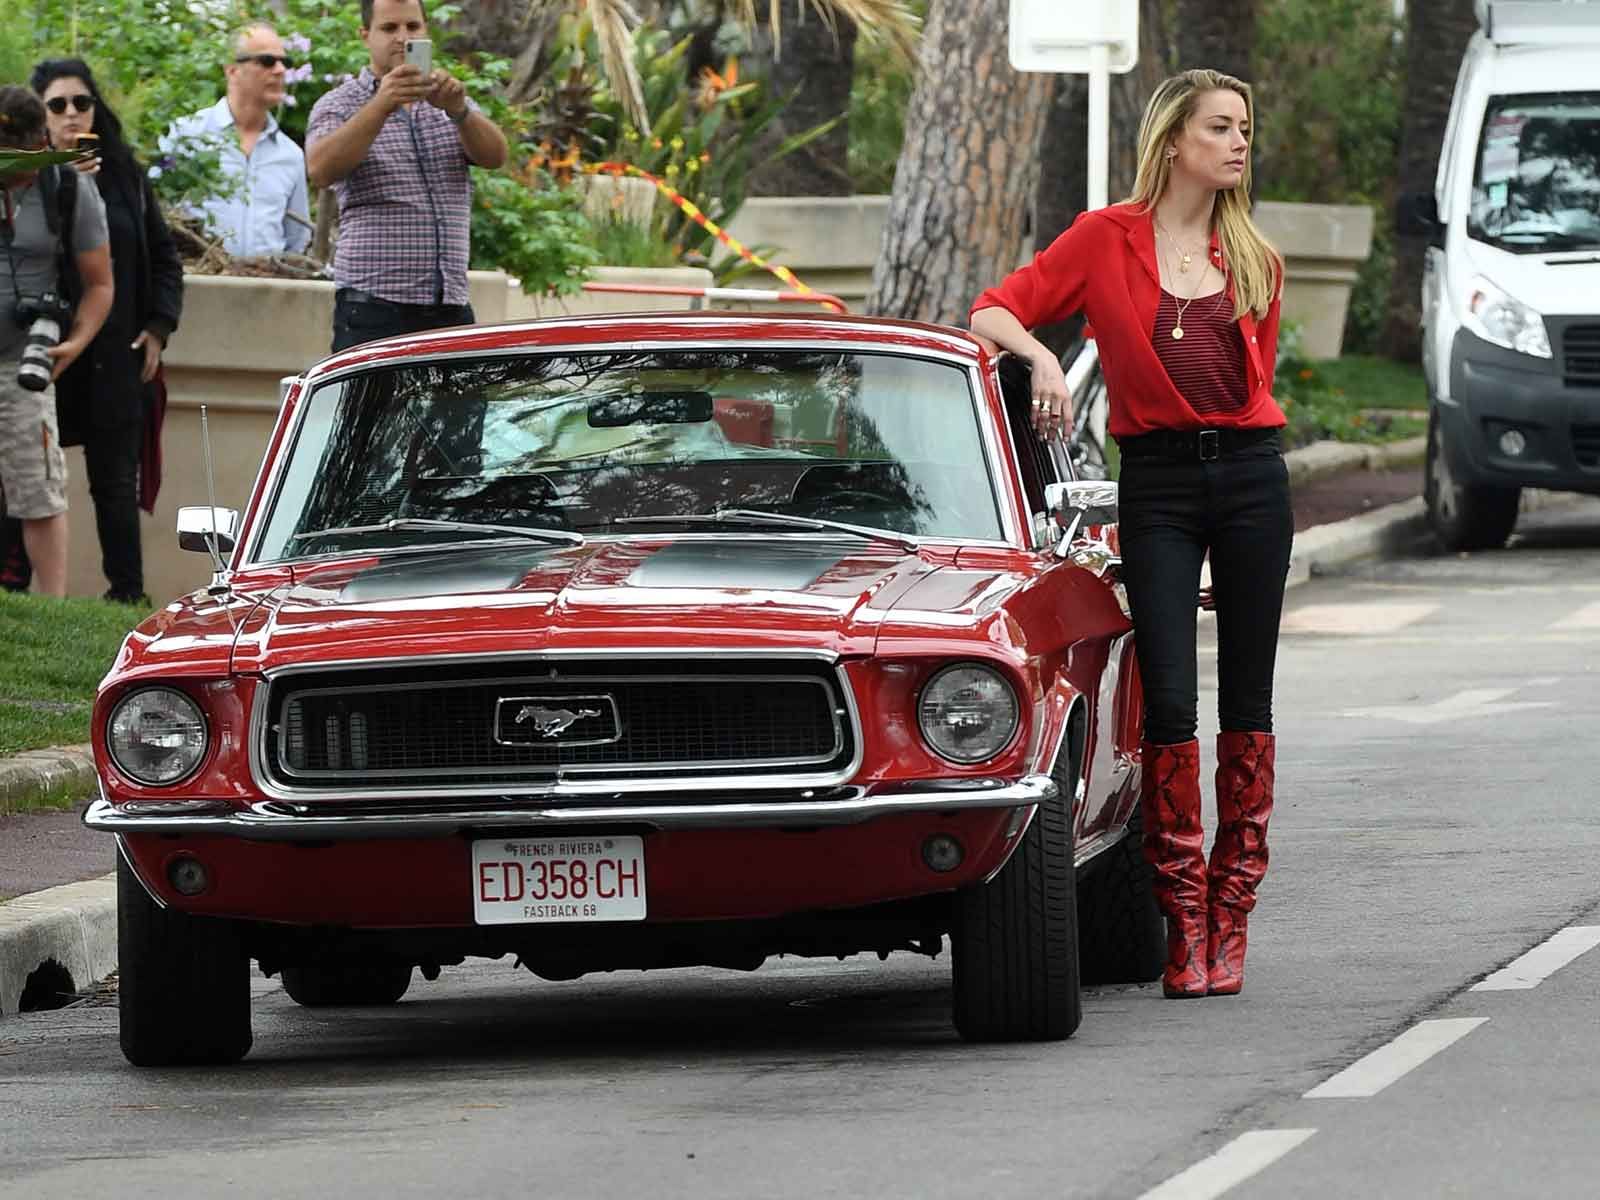 Hood Cars Vintage Babysitter Porn - Amber Heard Revs Up Our Hearts Alongside Cherry Red Mustang